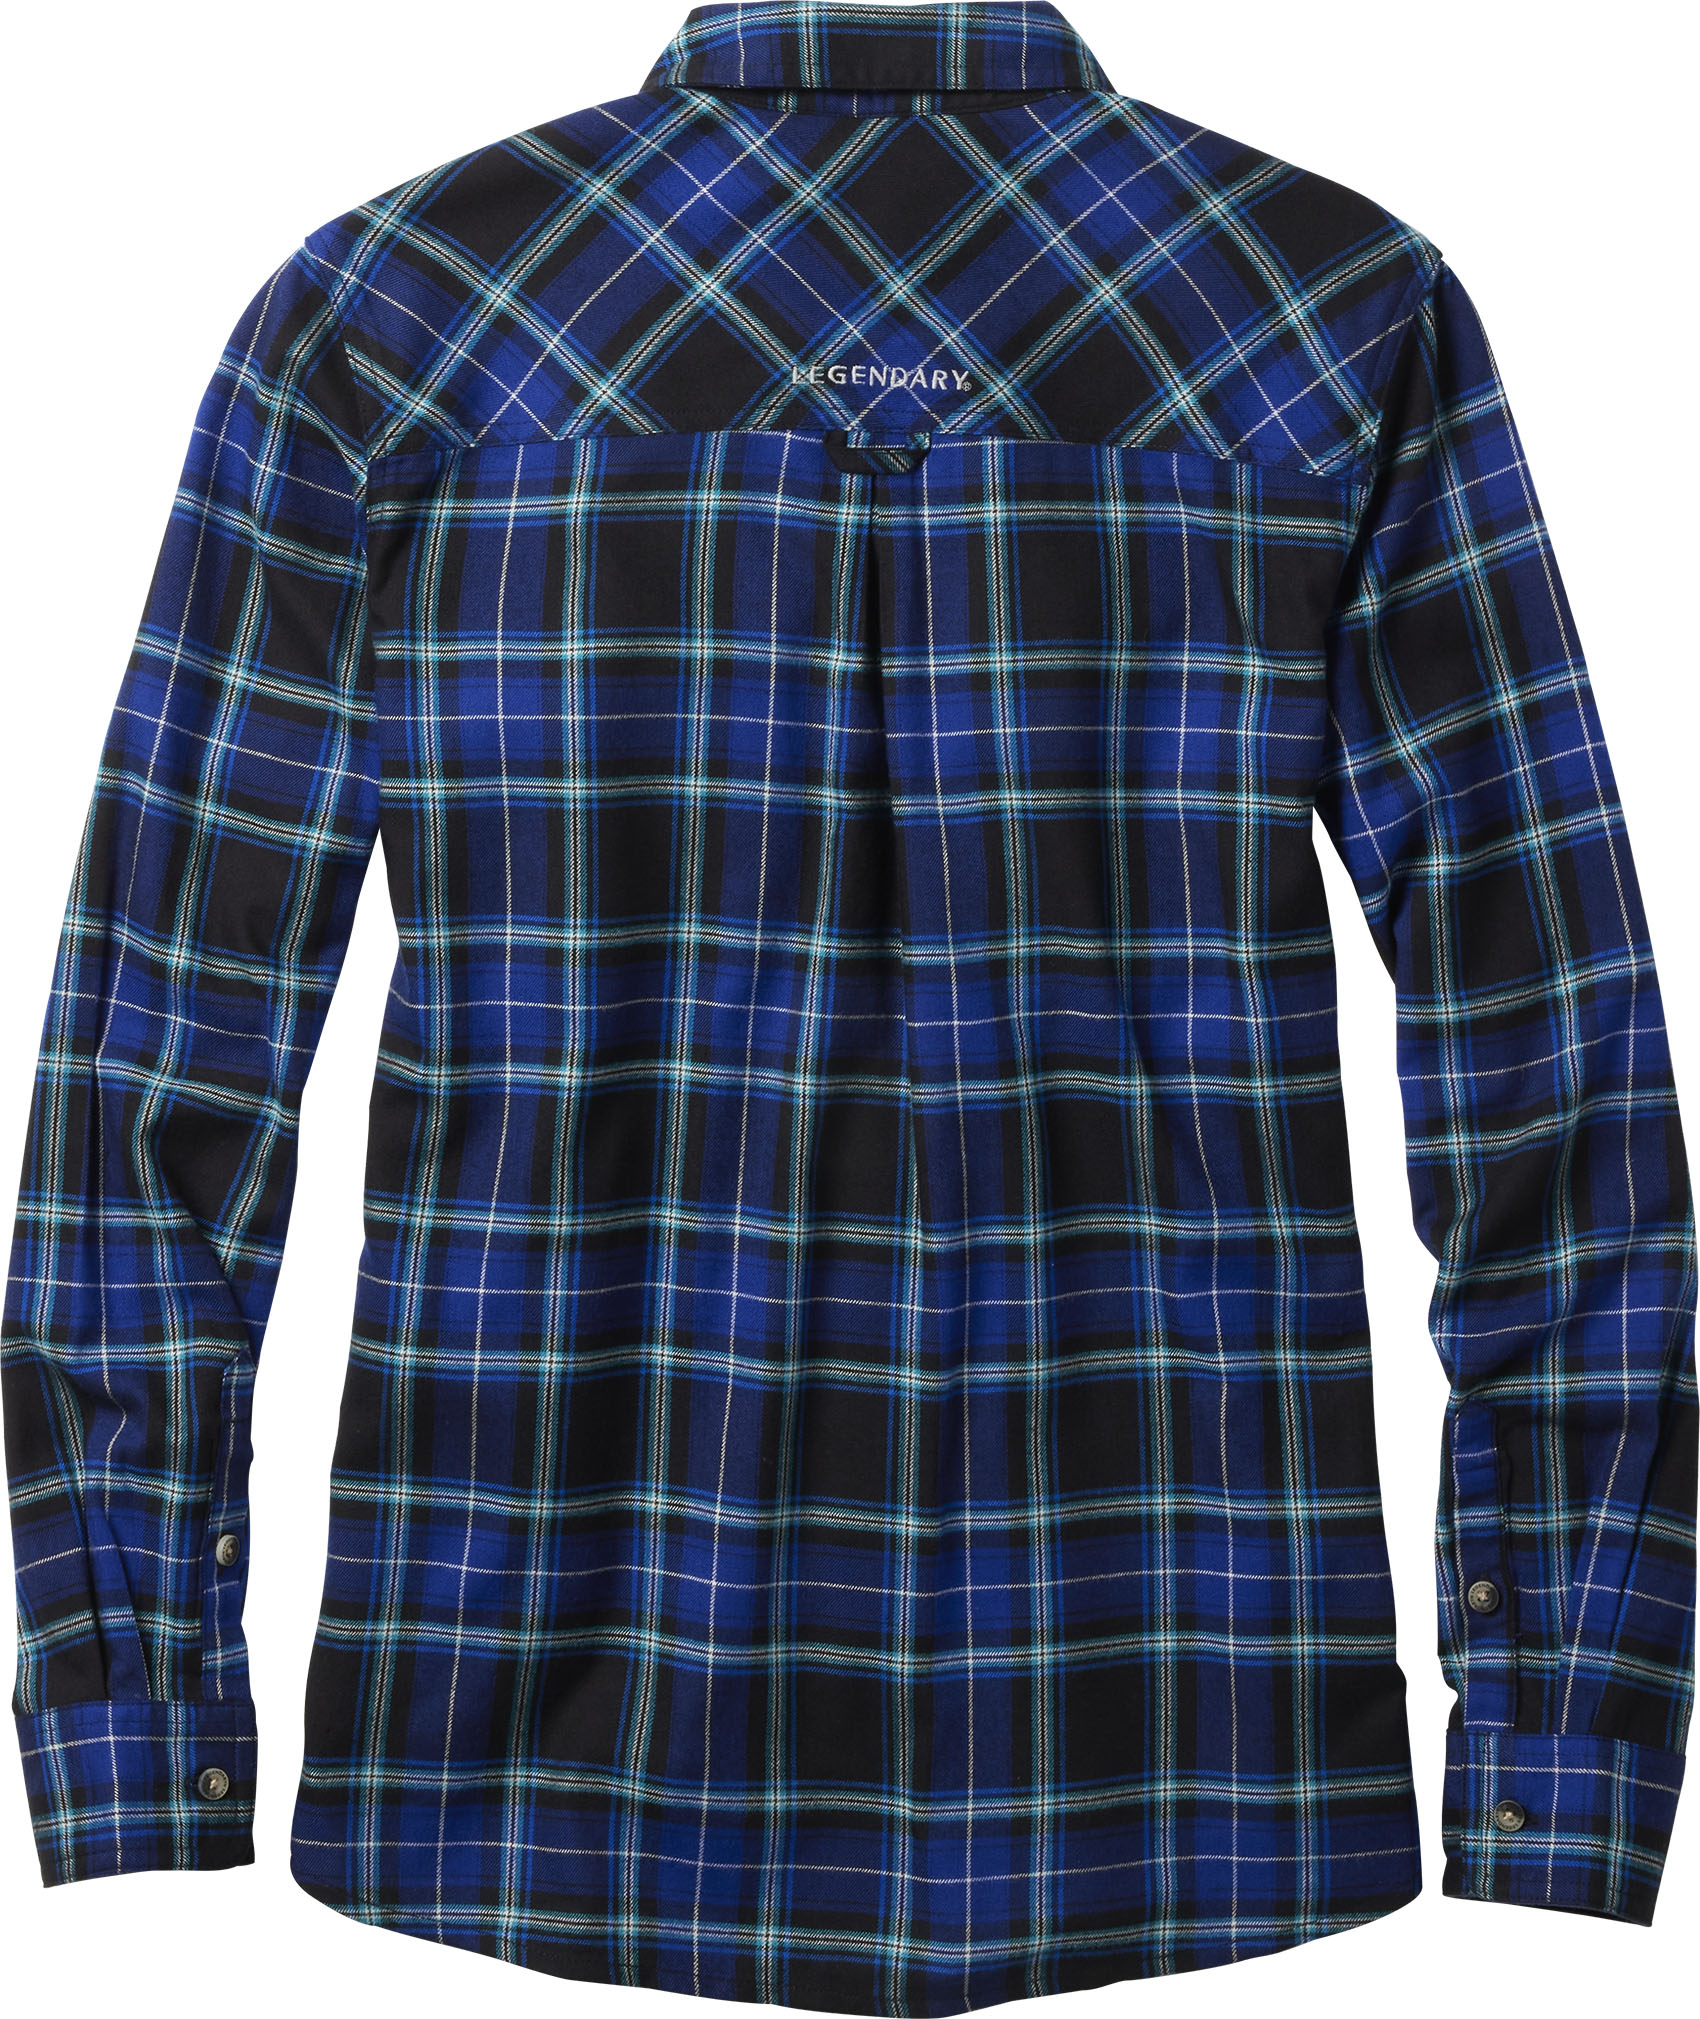 Legendary Whitetails Womens Comfort Fit Flannel Shirt Blackberry Blue Plaid XL Rayon/Polyester